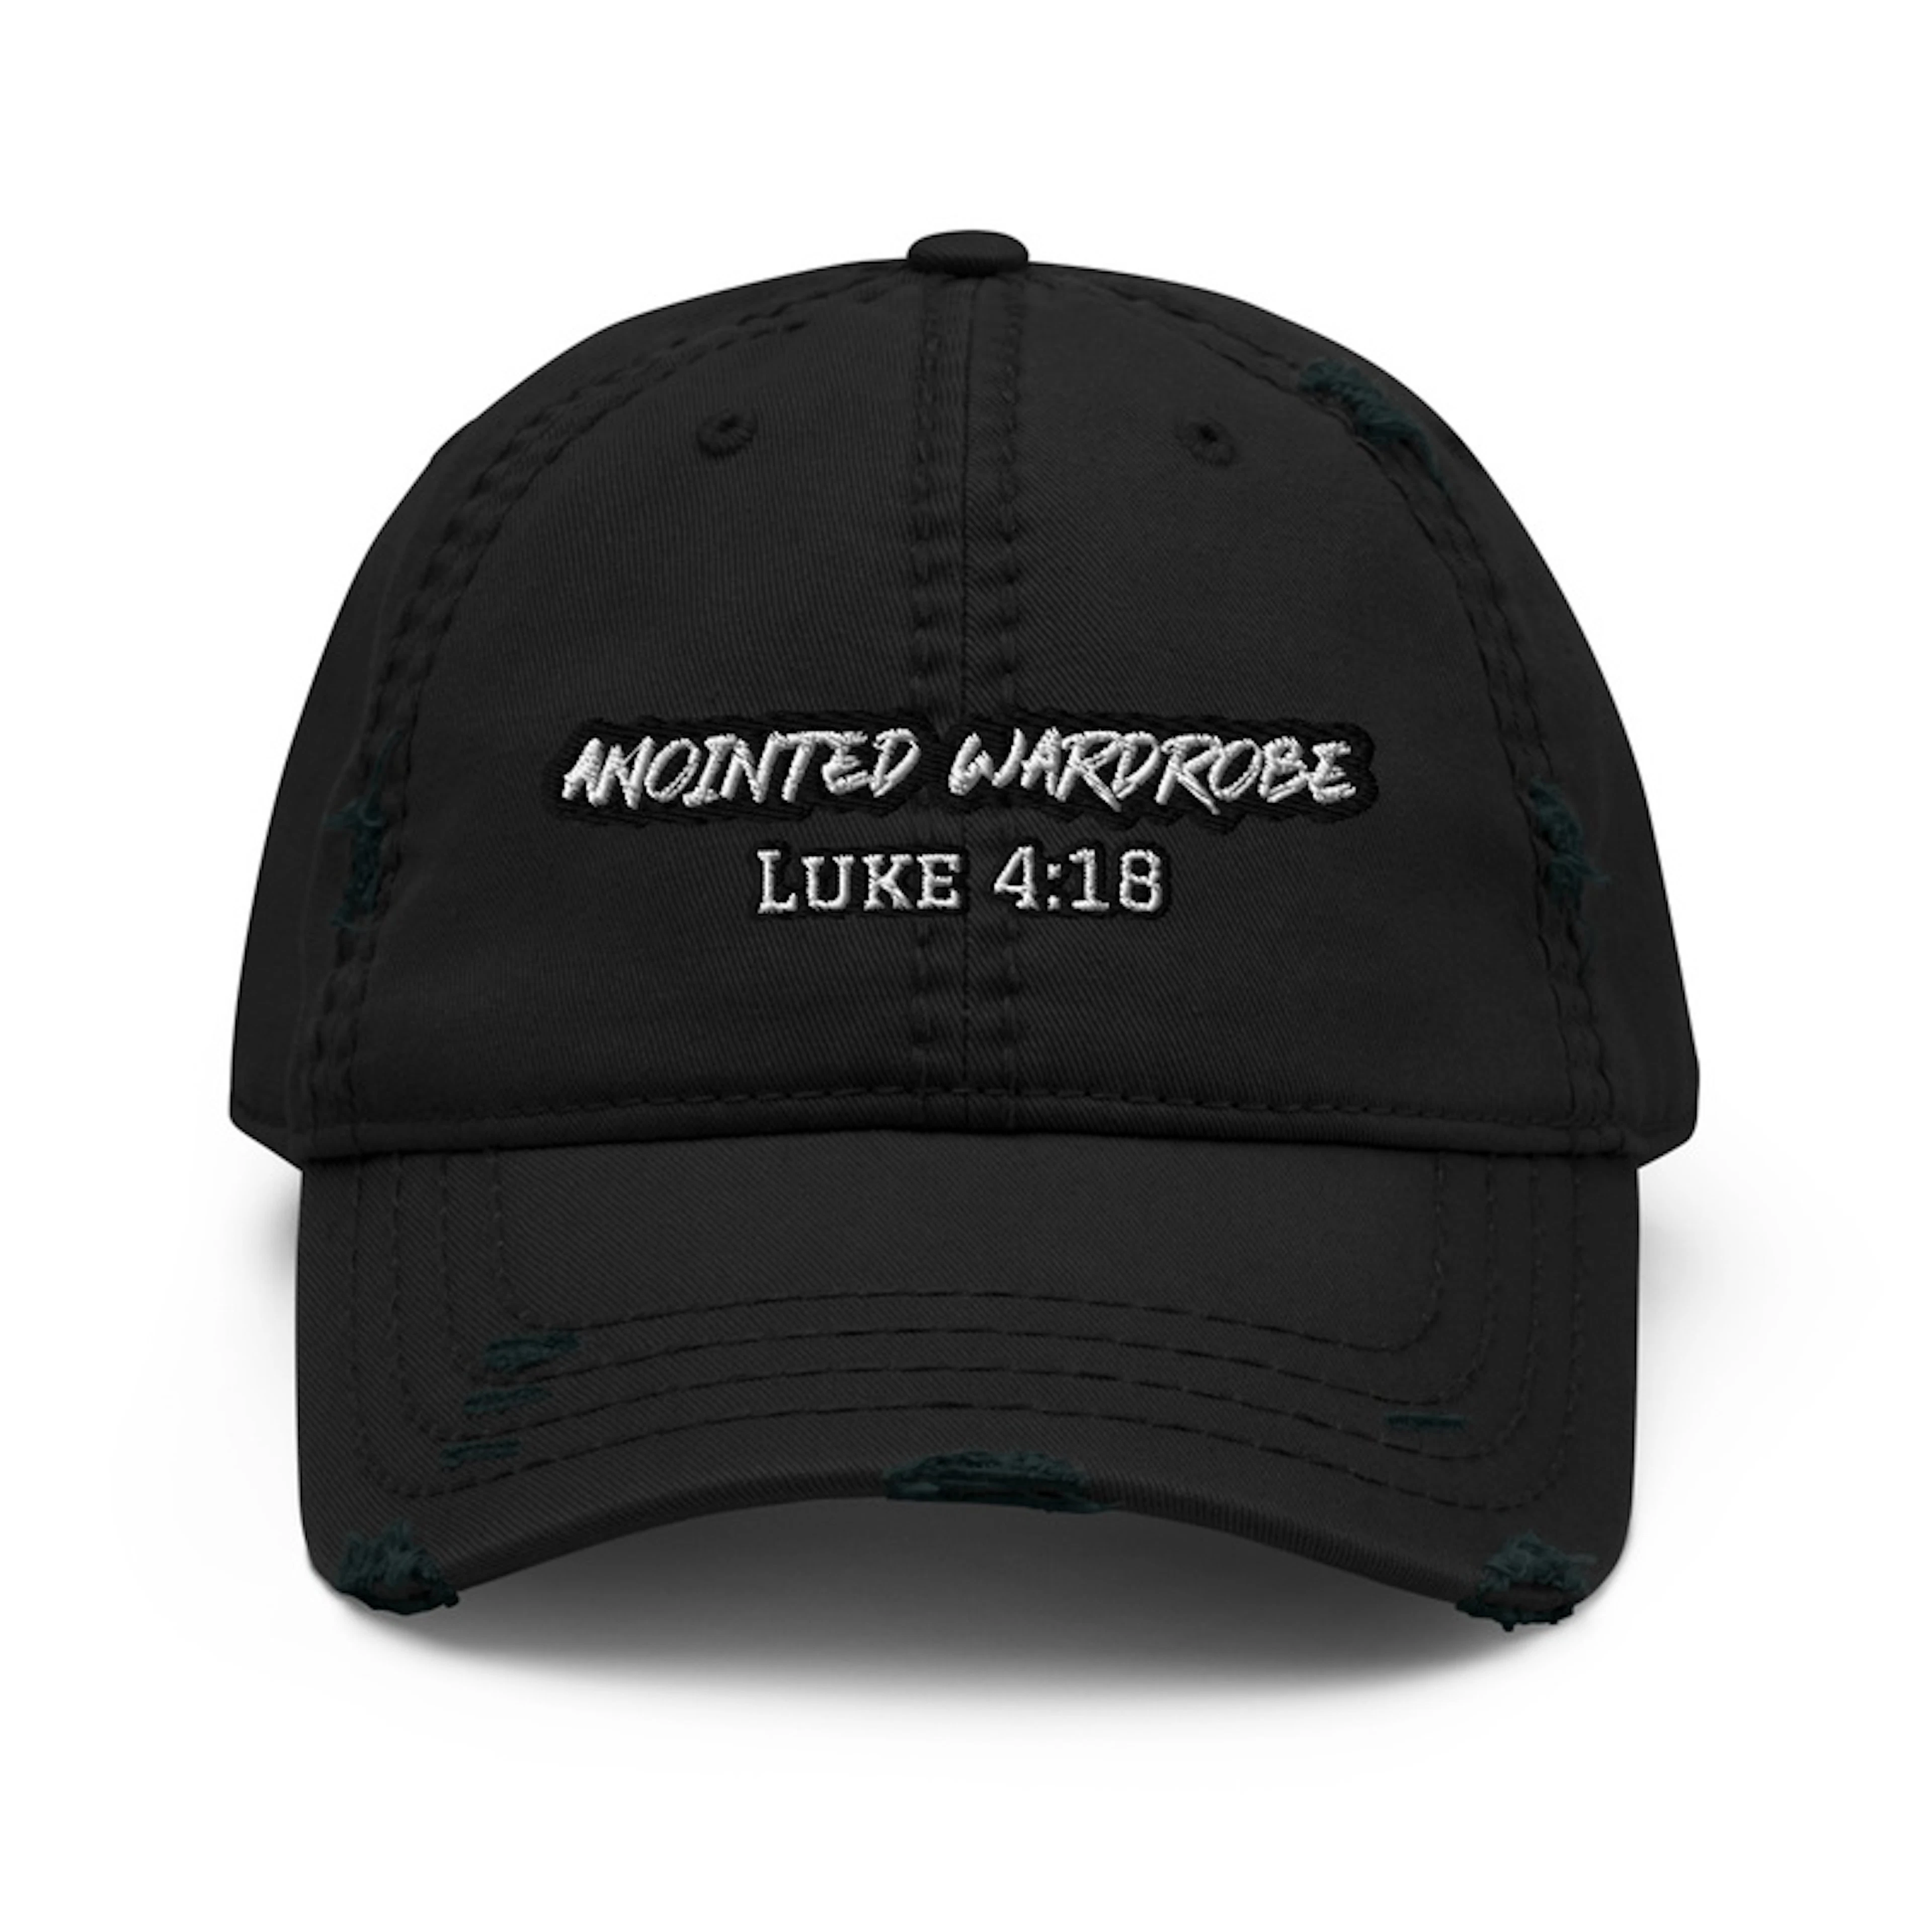 Anointed Wardrobe Distressed Hat